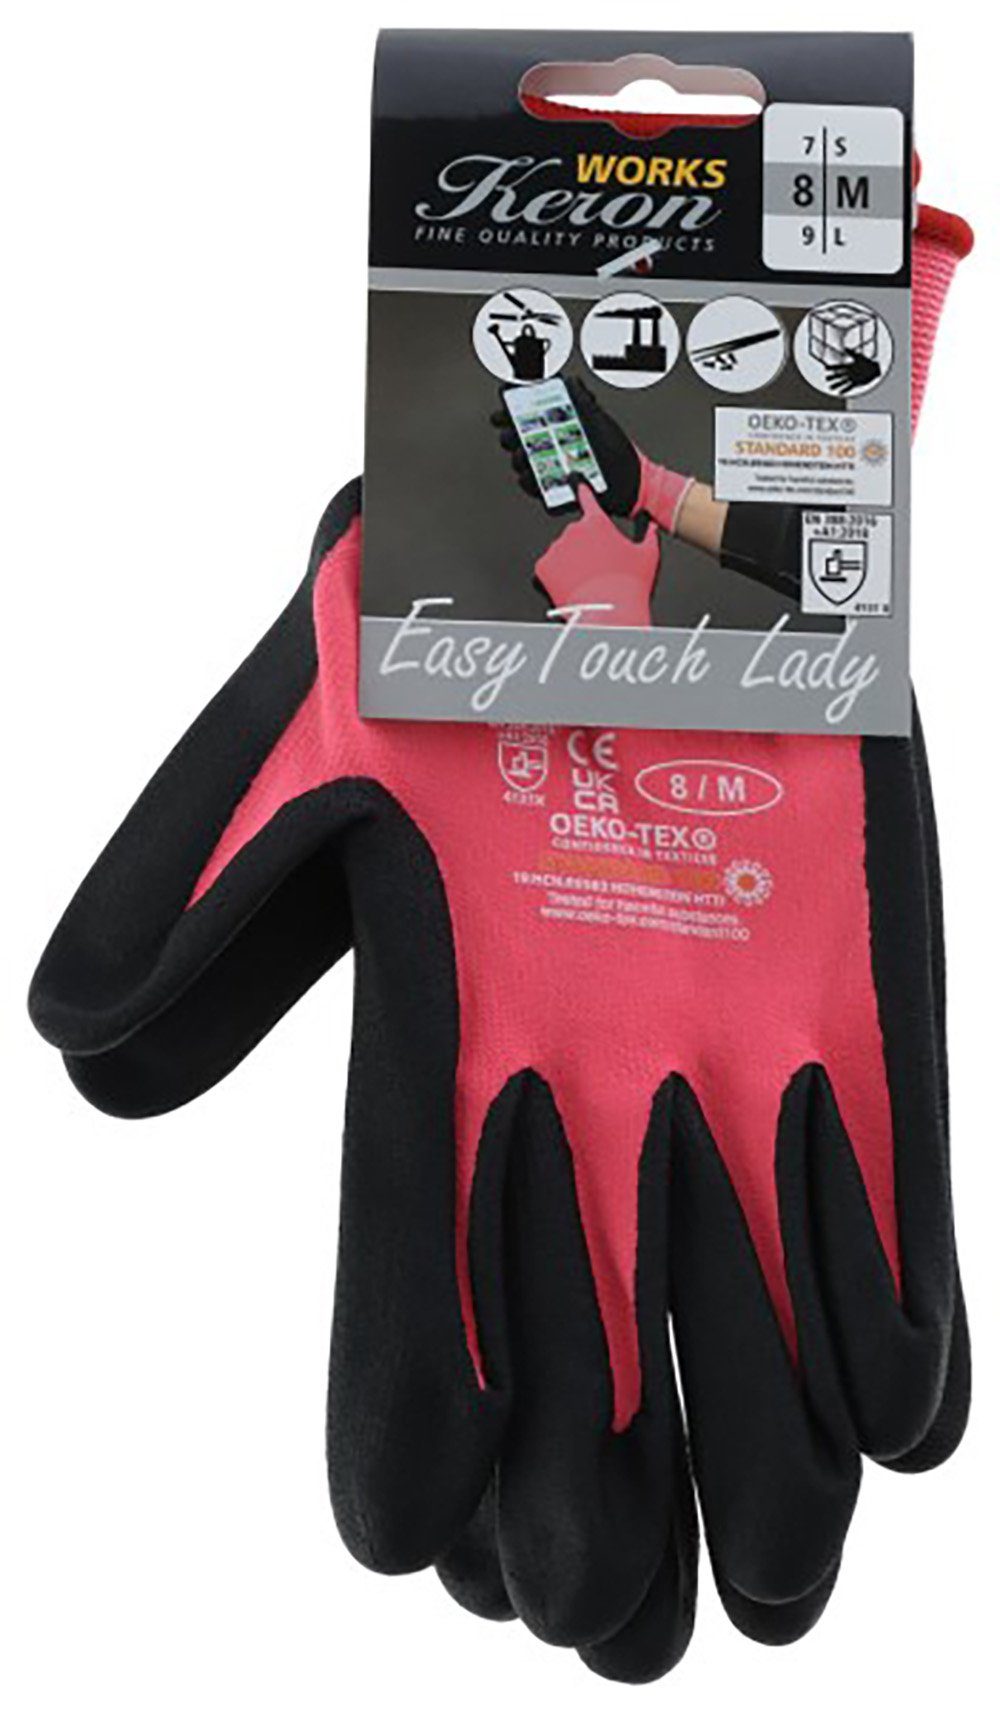 3x pink, Kerbl 9/L, Gr. Touchscreenhandschuh Arbeitshandschuhe 297959 EasyTouch Lady,